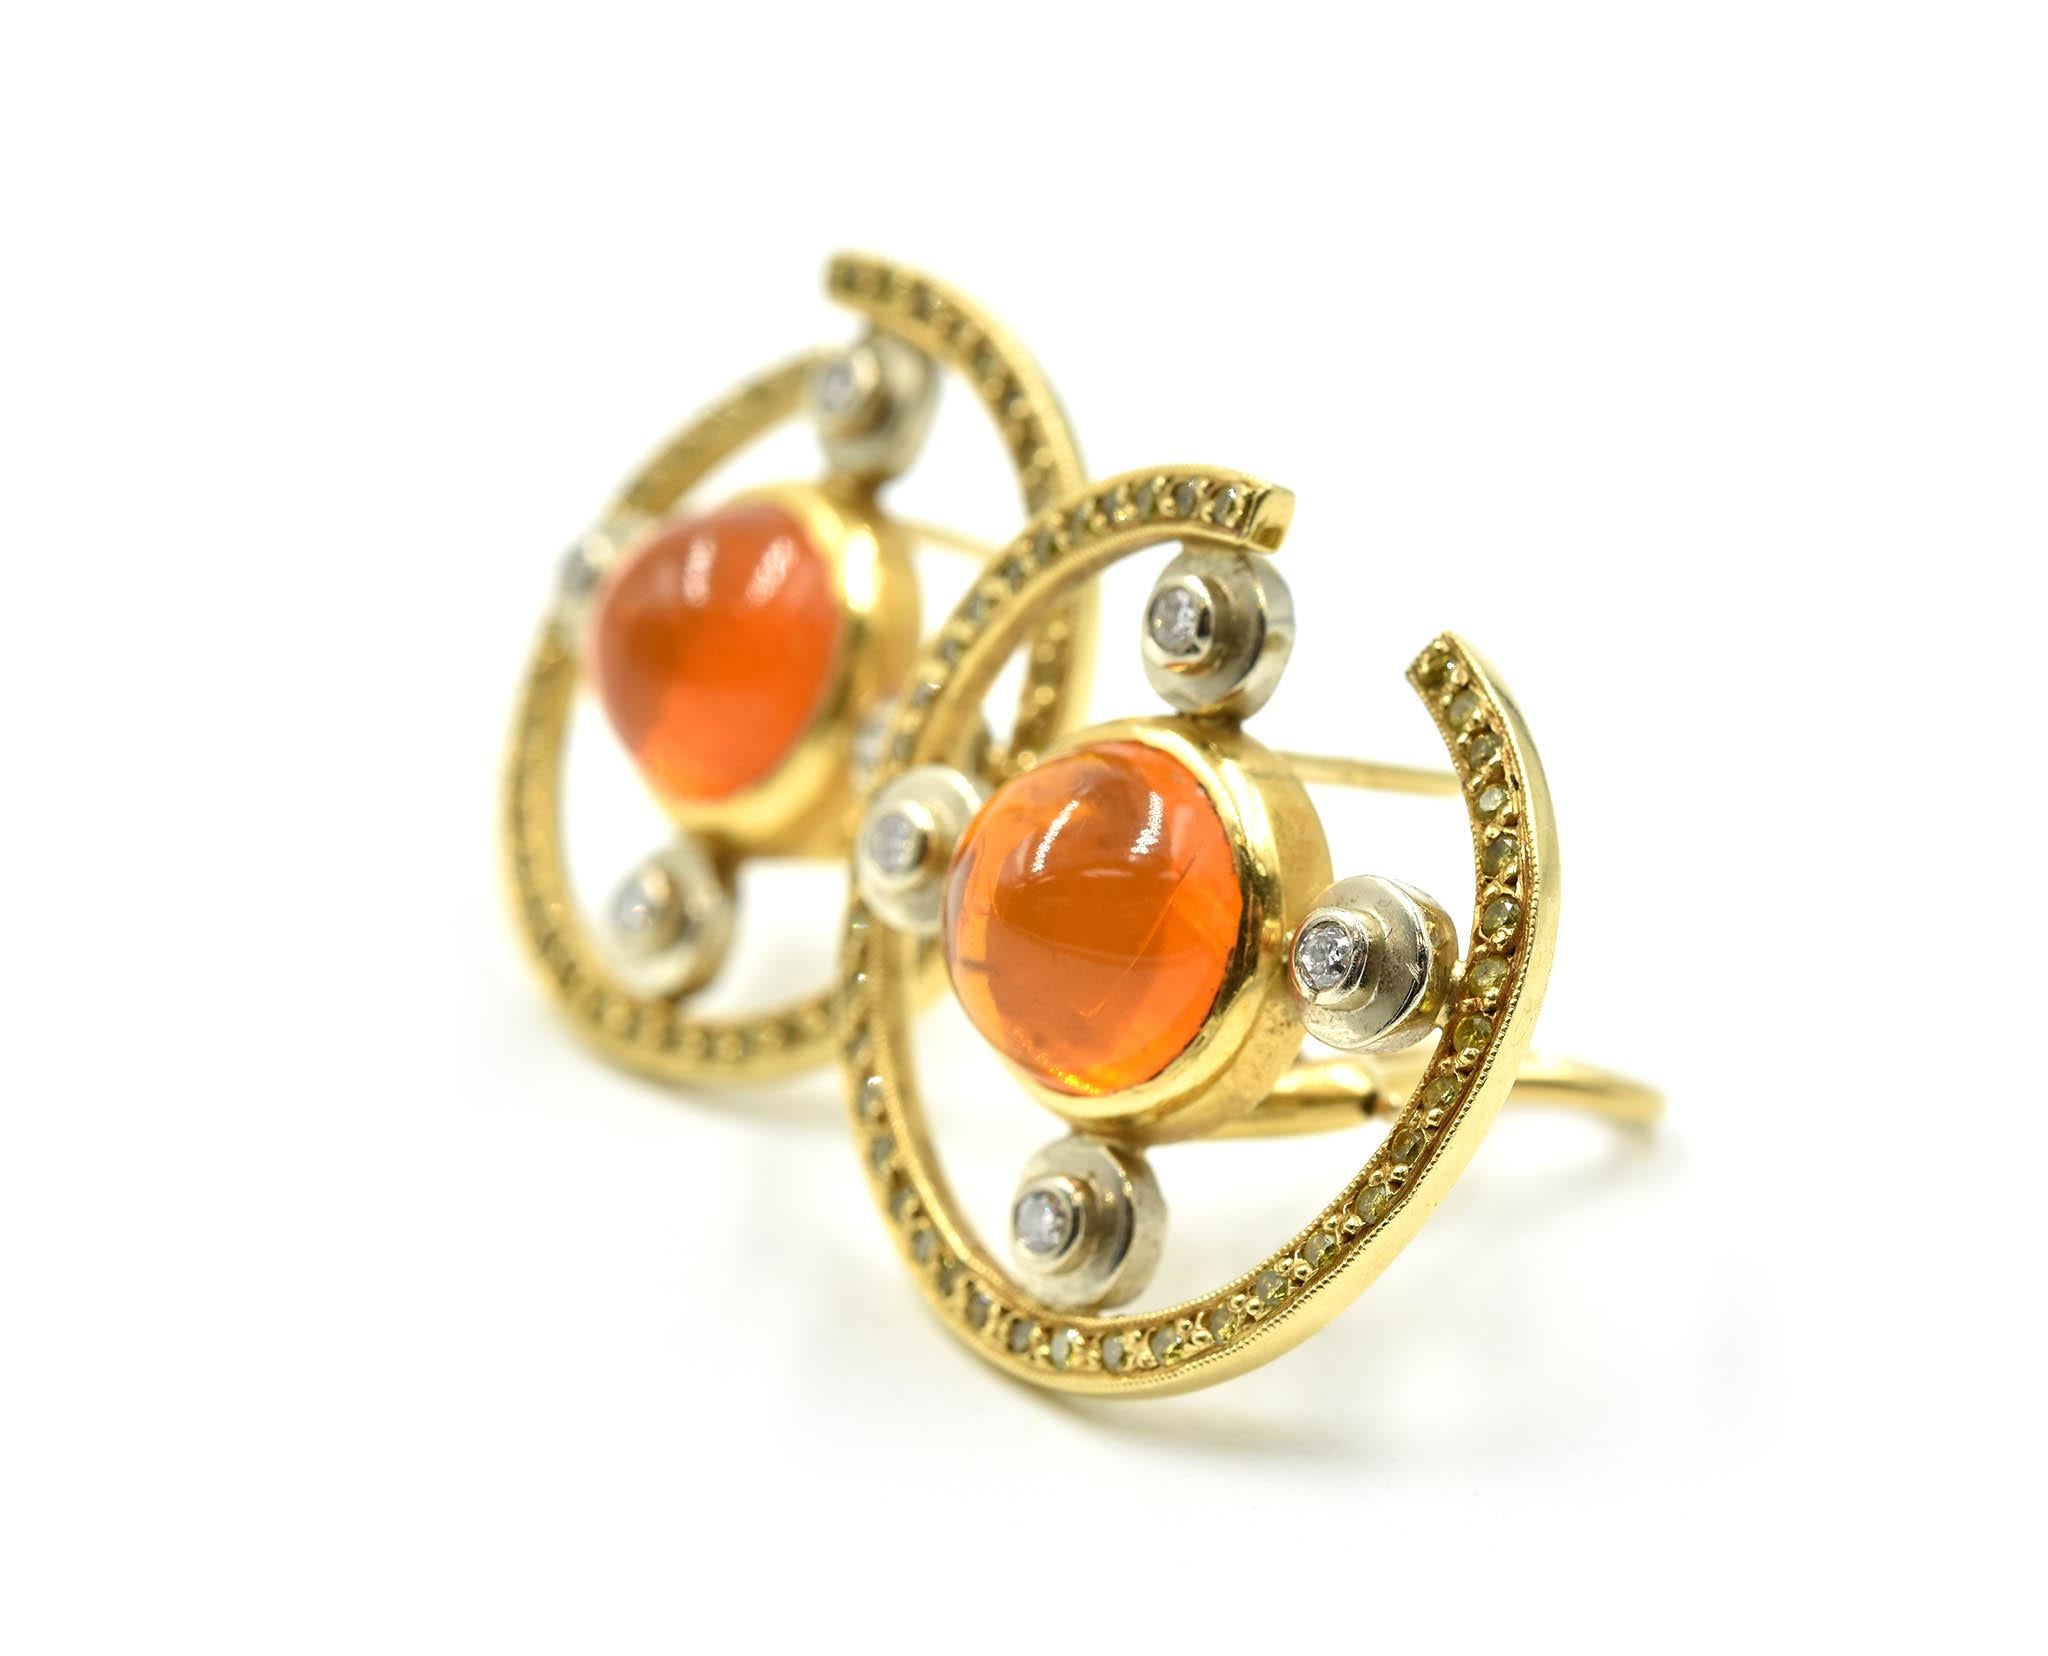 Contemporary 18 Karat Gold, Fire Opal with 0.96 Carat Round White and Yellow Diamond, Earring